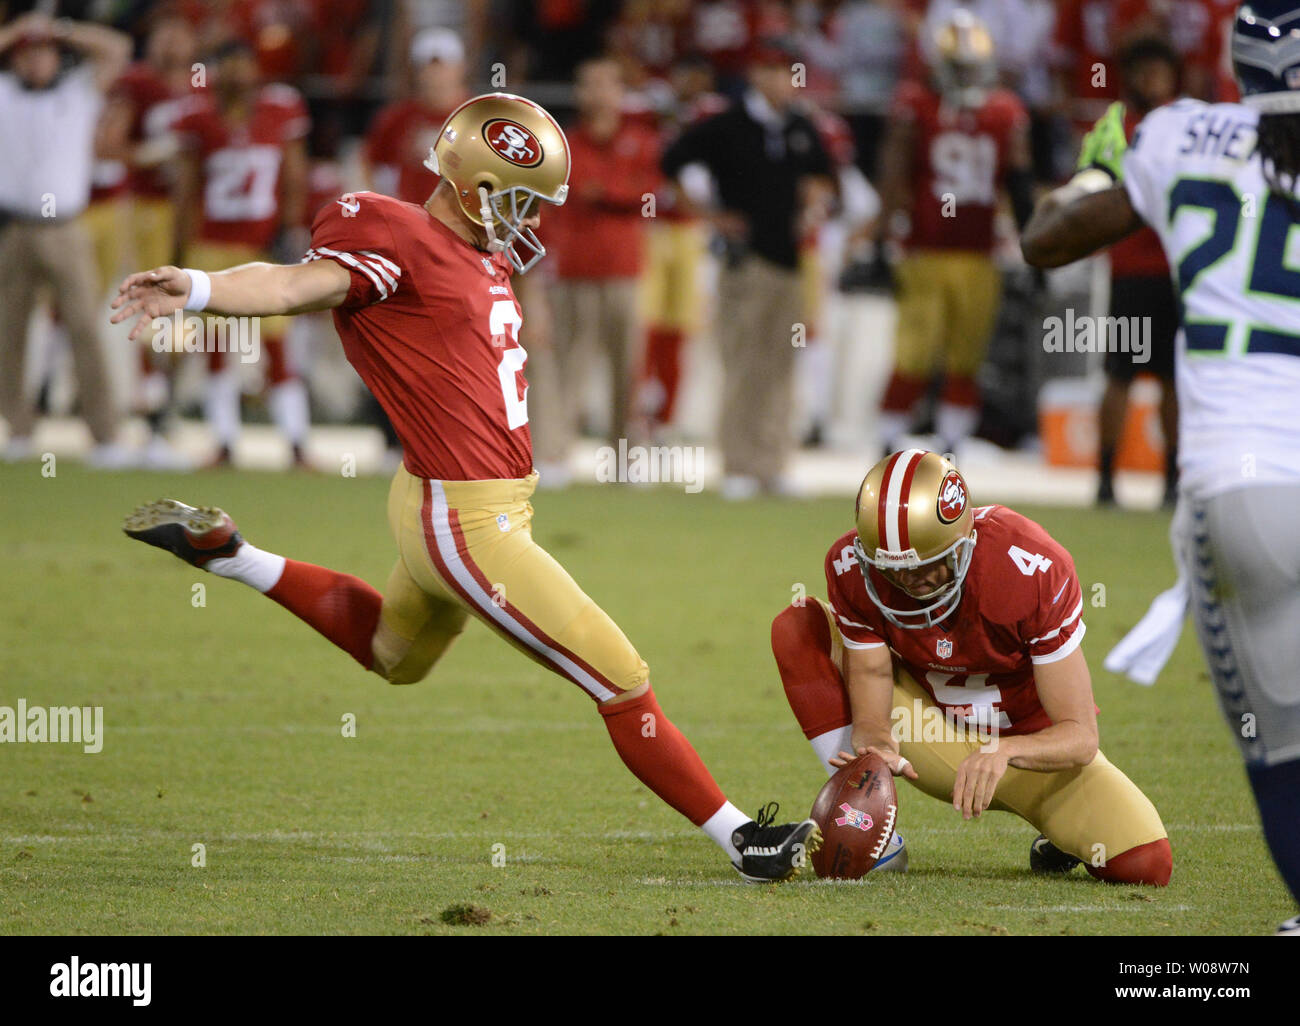 San Francisco 49ers kicker David Akers (L) hits a 28 yard field goal from the hold of Andy Lee in the fourth quarter against the Seattle Seahawks at Candlestick Park in San Francisco on October 18, 2012. The 49ers defeated the Seahawks 13-6.     UPI/Terry Schmitt Stock Photo